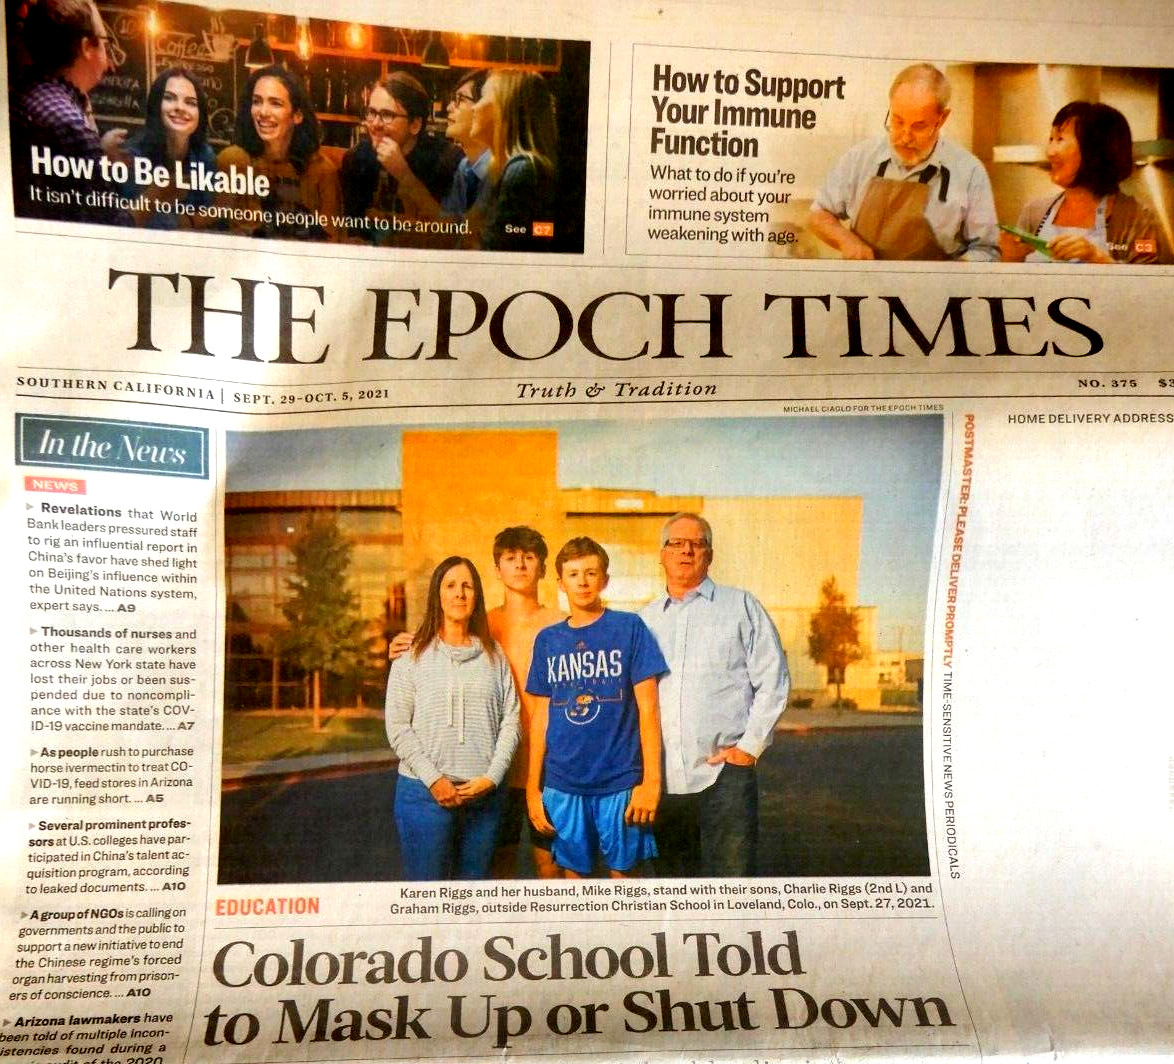 THE EPOCH TIMES NEWSPAPER Sept. 29 - Oct. 5, 2021 DEVELOPING COVID LIKE VIRUSES